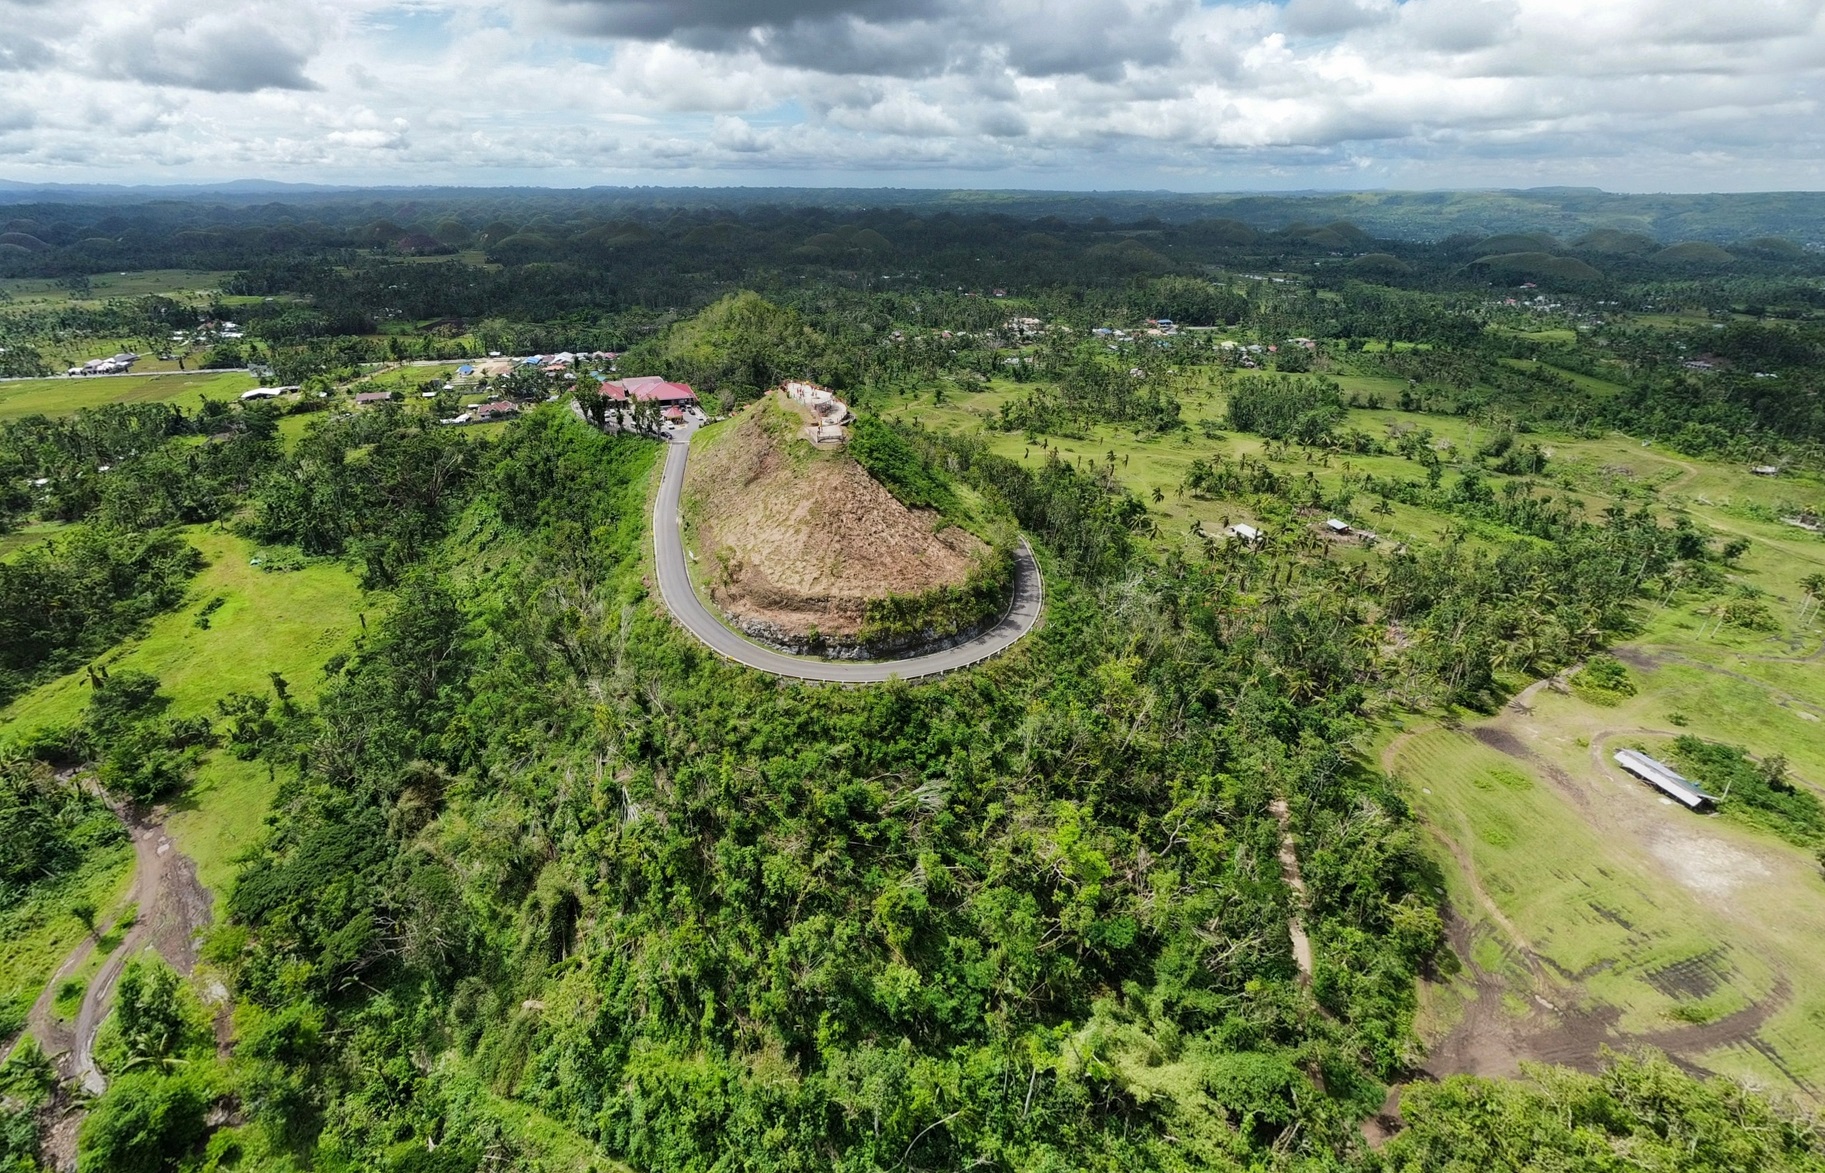 <p>The giants spent days throwing mud balls at each other until they finally started fist-fighting. In the end, the giants knocked each other down and both met their end that day. The remains of the mud balls that they’d thrown are said to have become the Chocolate Hills.</p>